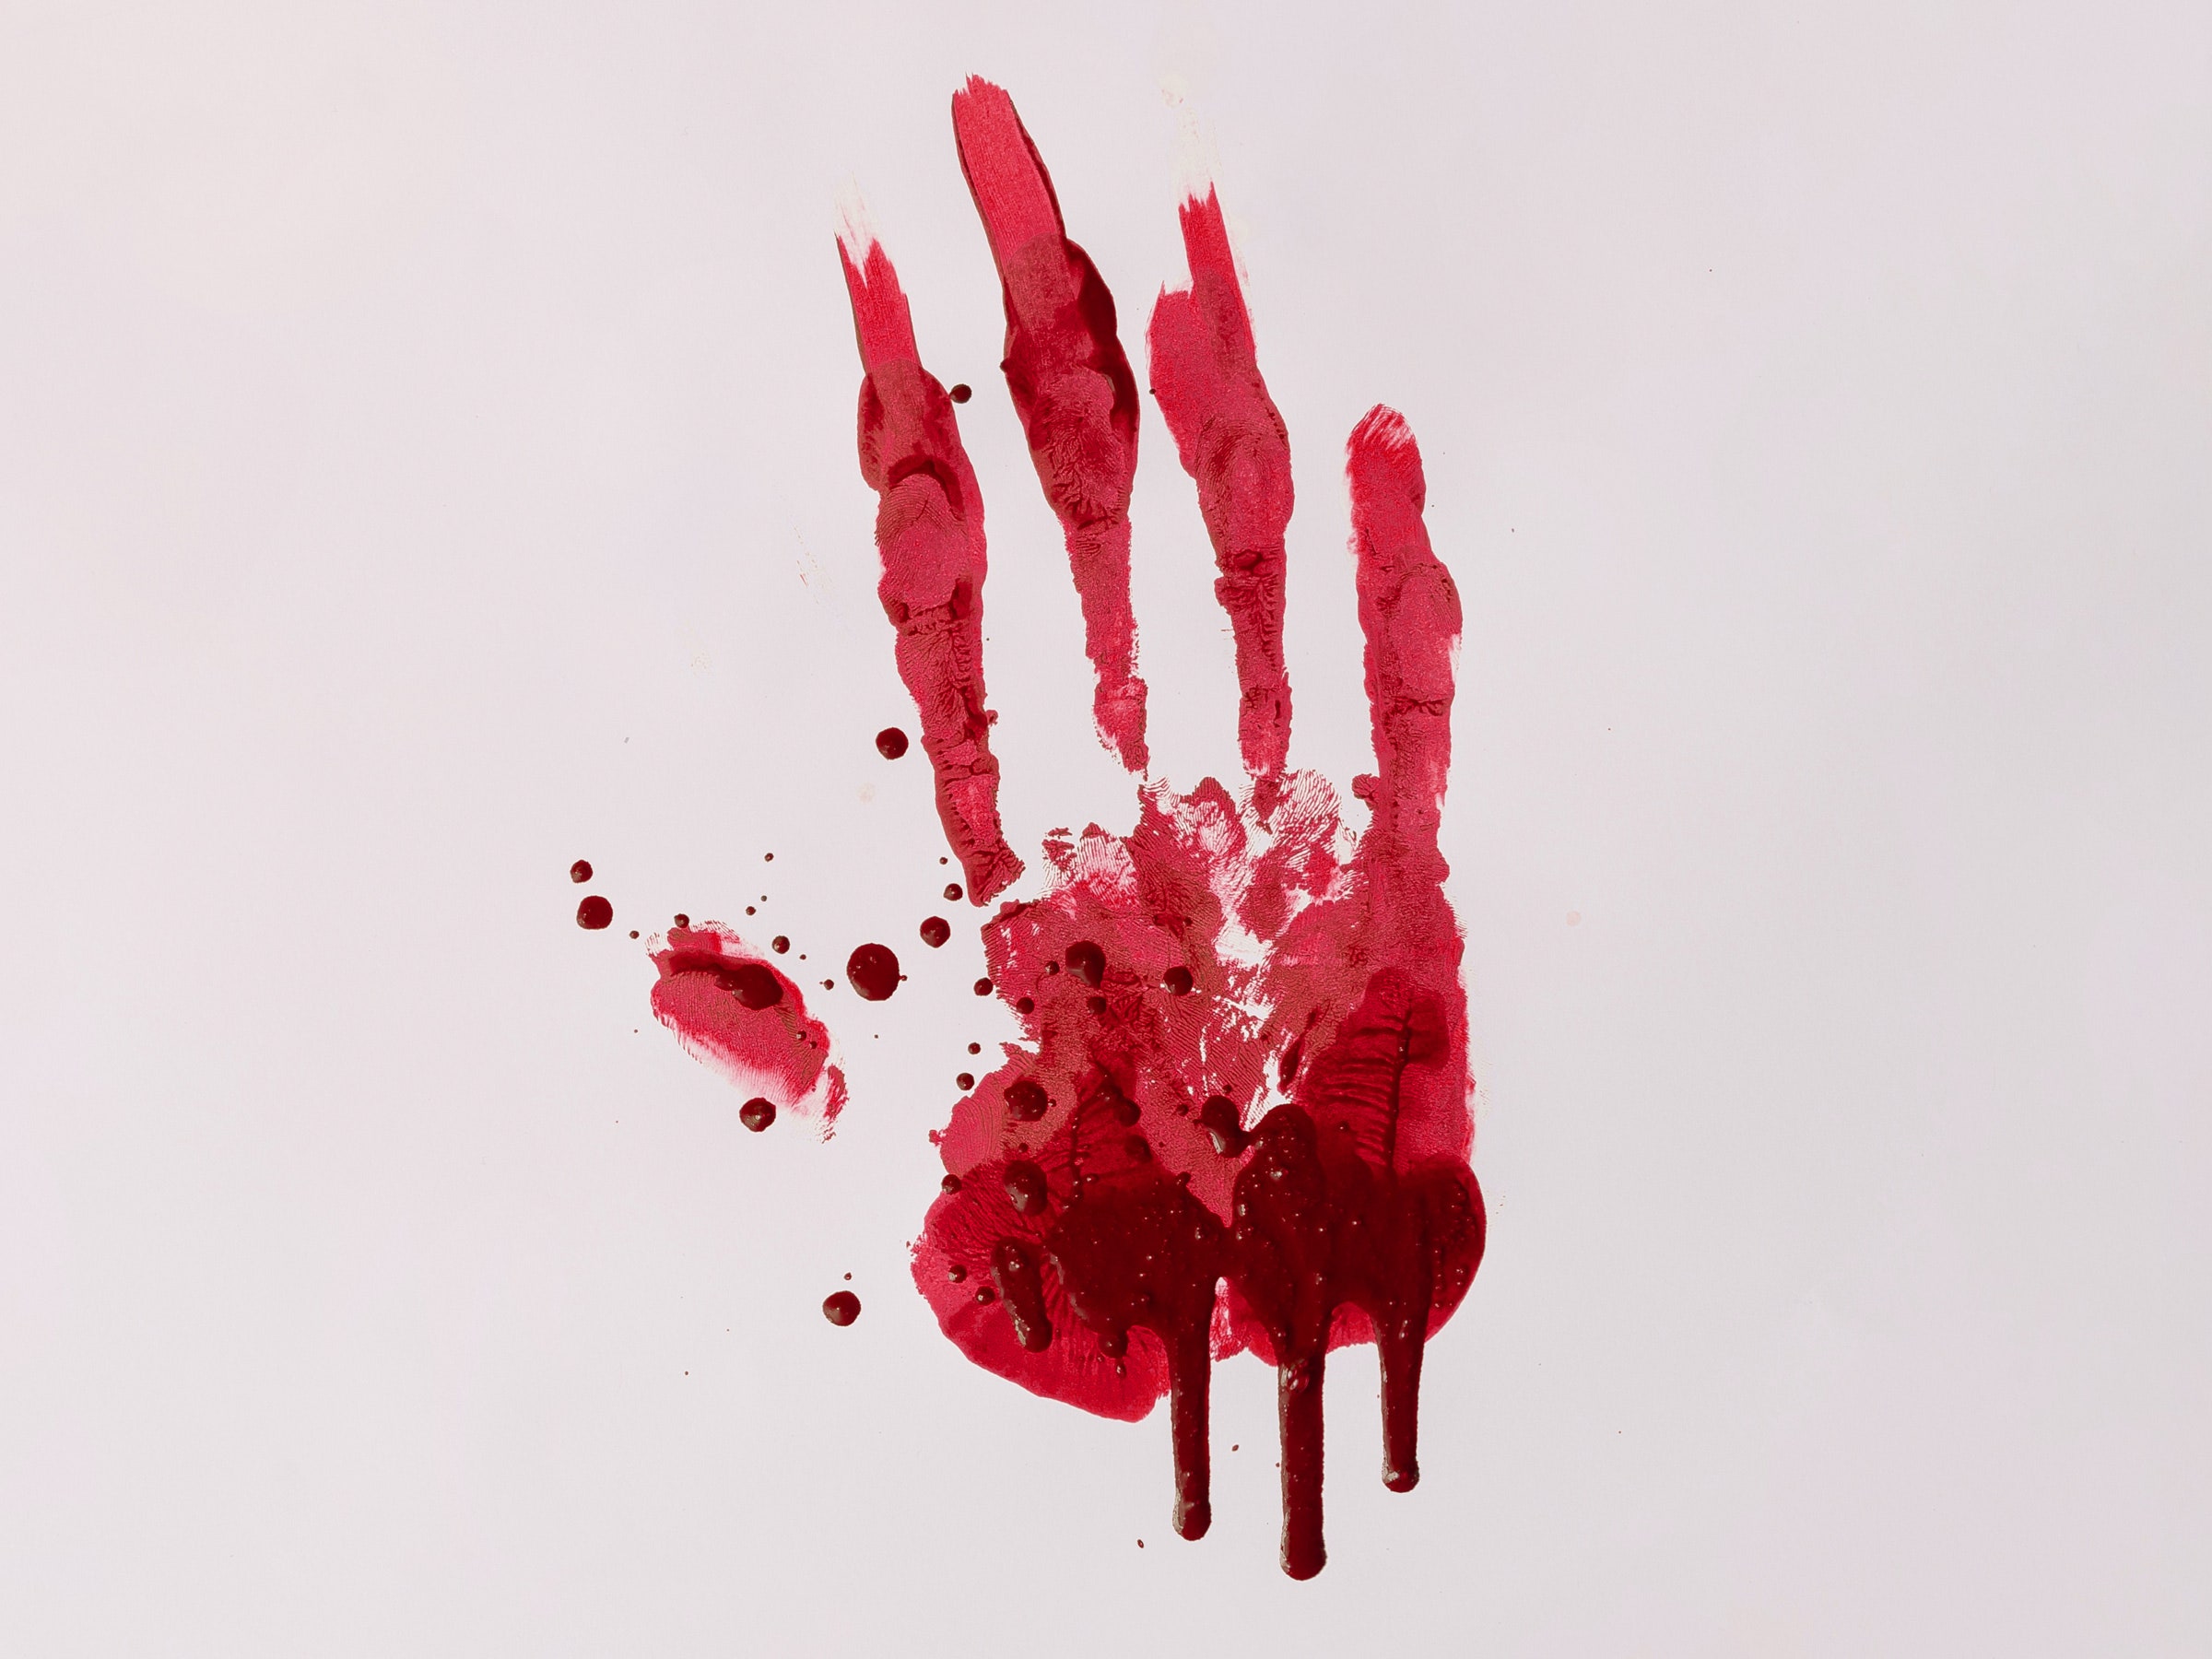 How to Make Fake Blood: Try This Medically Inspired Recipe | WIRED